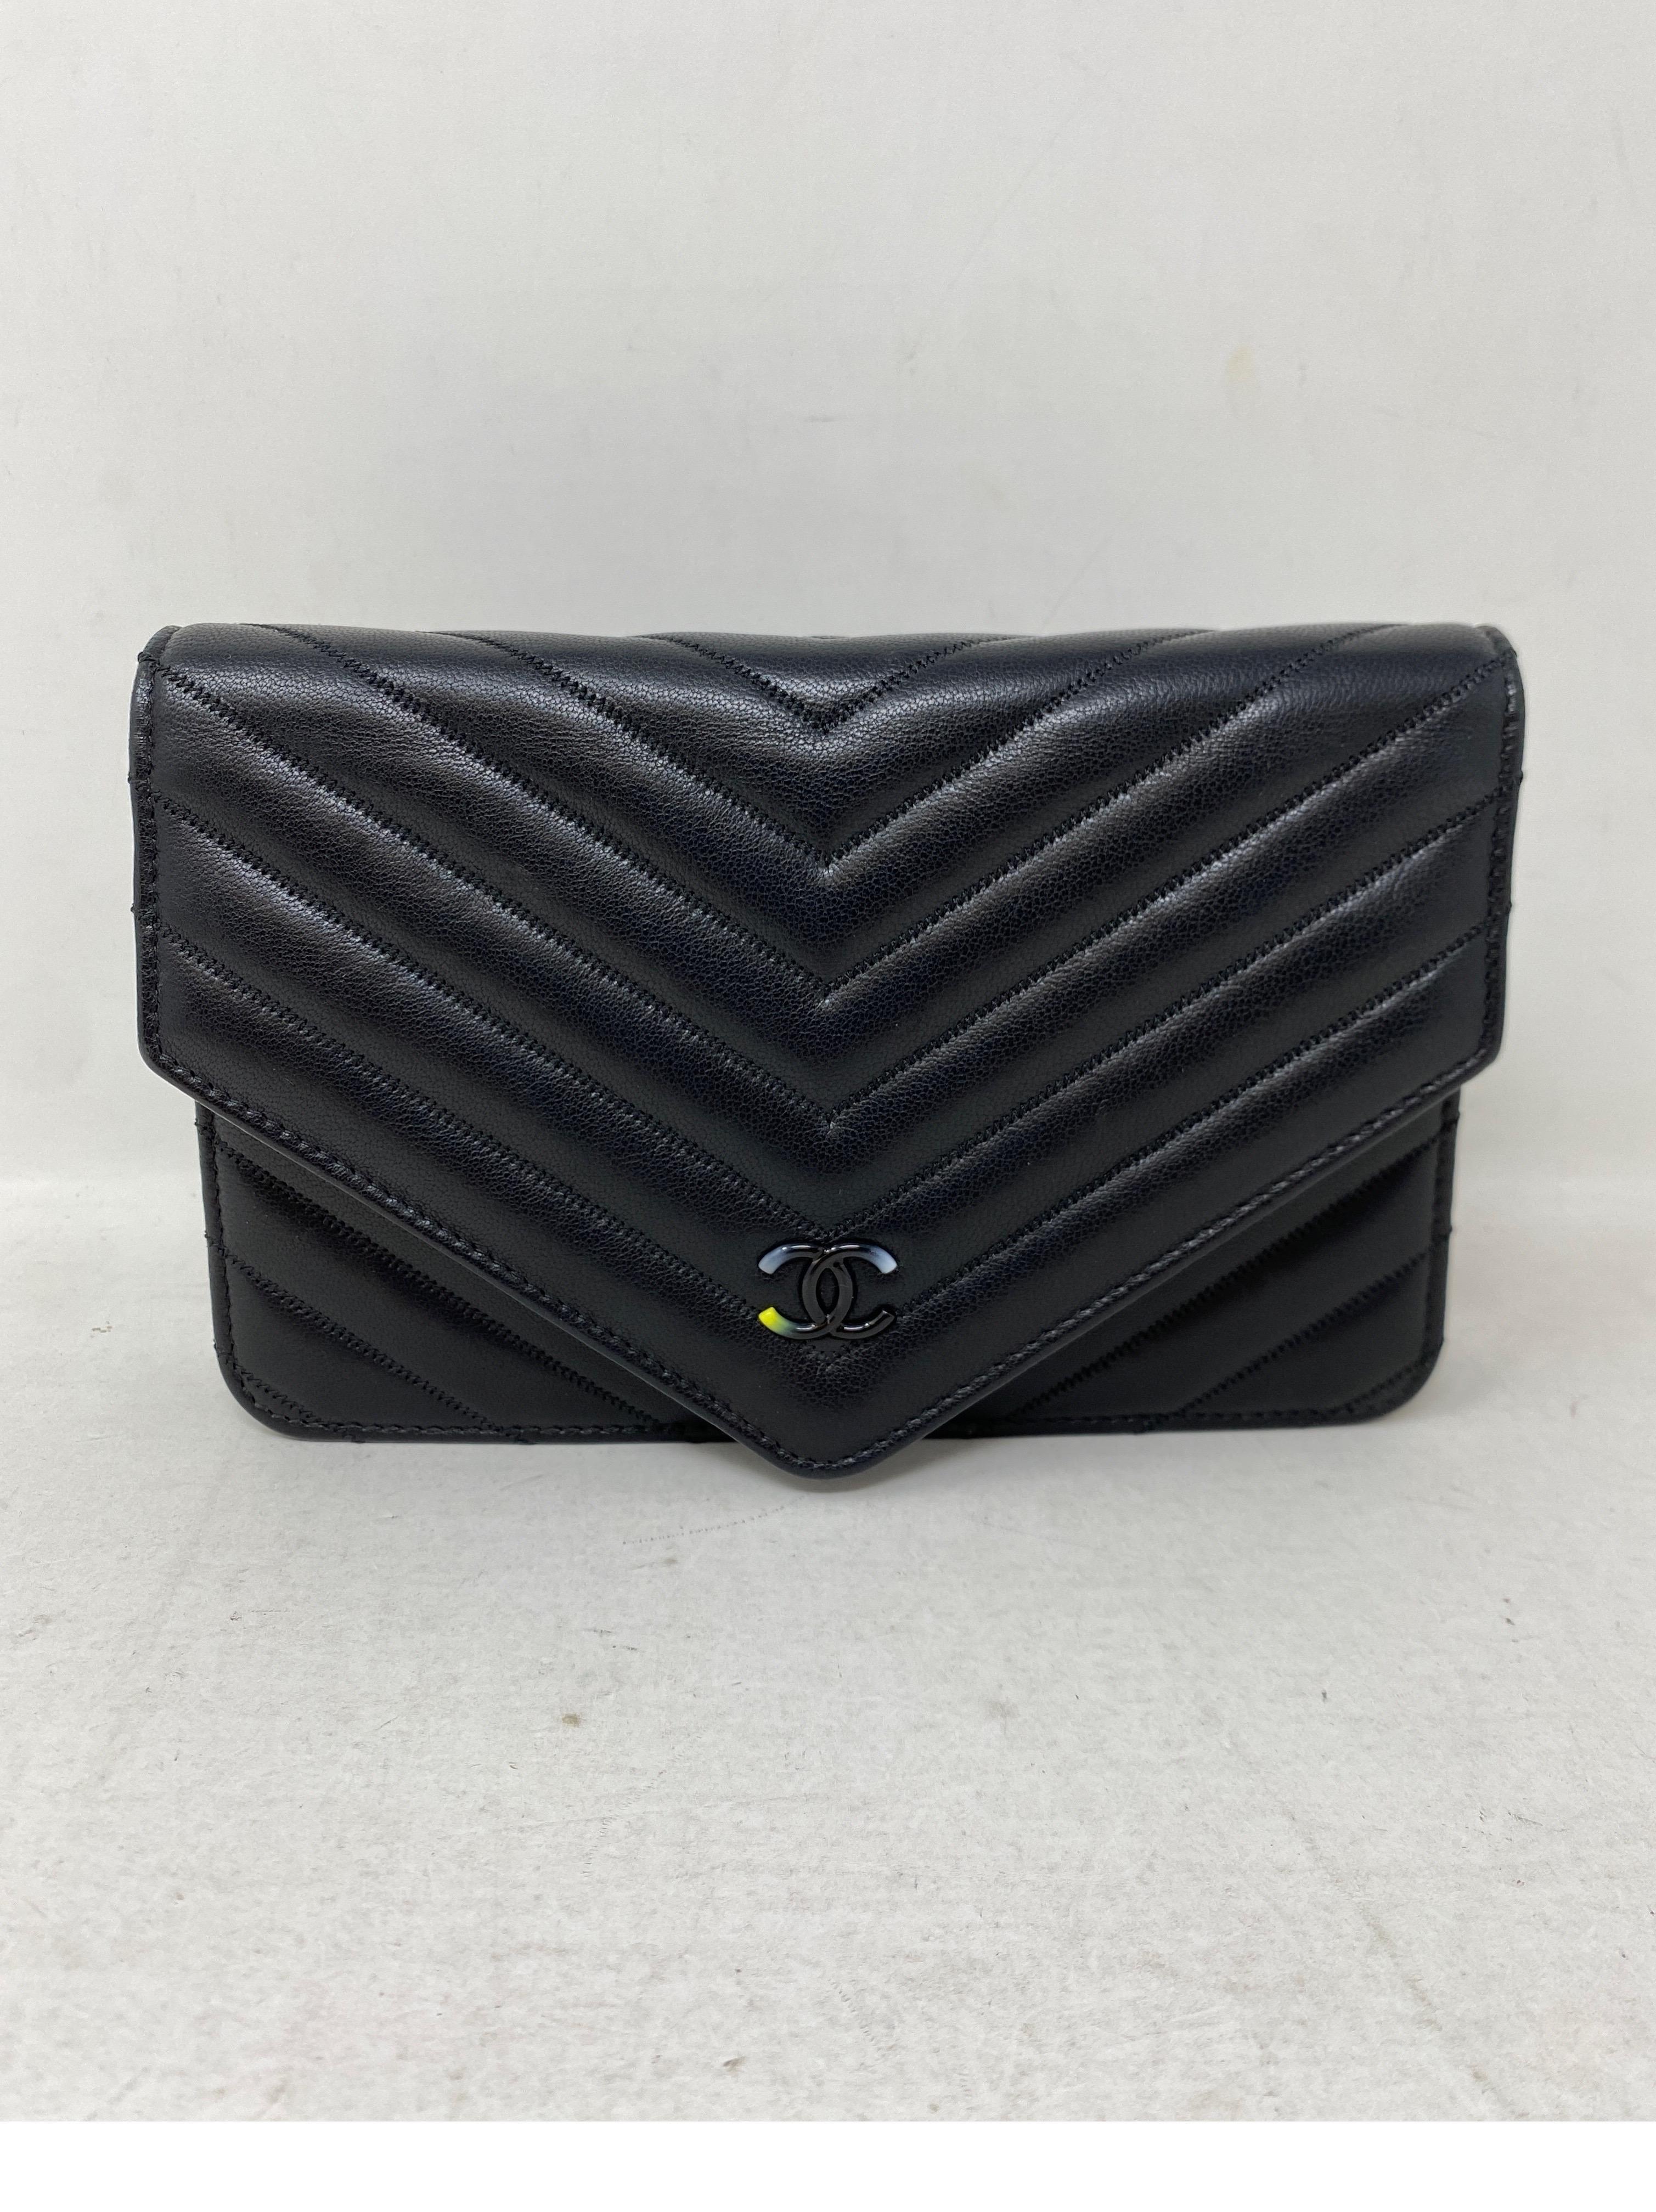 Chanel Chevron Black Wallet On A Chain Bag. Rare CC multi-color plastic lucite material. Black chevron leather. MInt like new condition. Can be worn as a crossbody or doubled as a shoulder bag. Also can be worn as a clutch. Includes authenticity